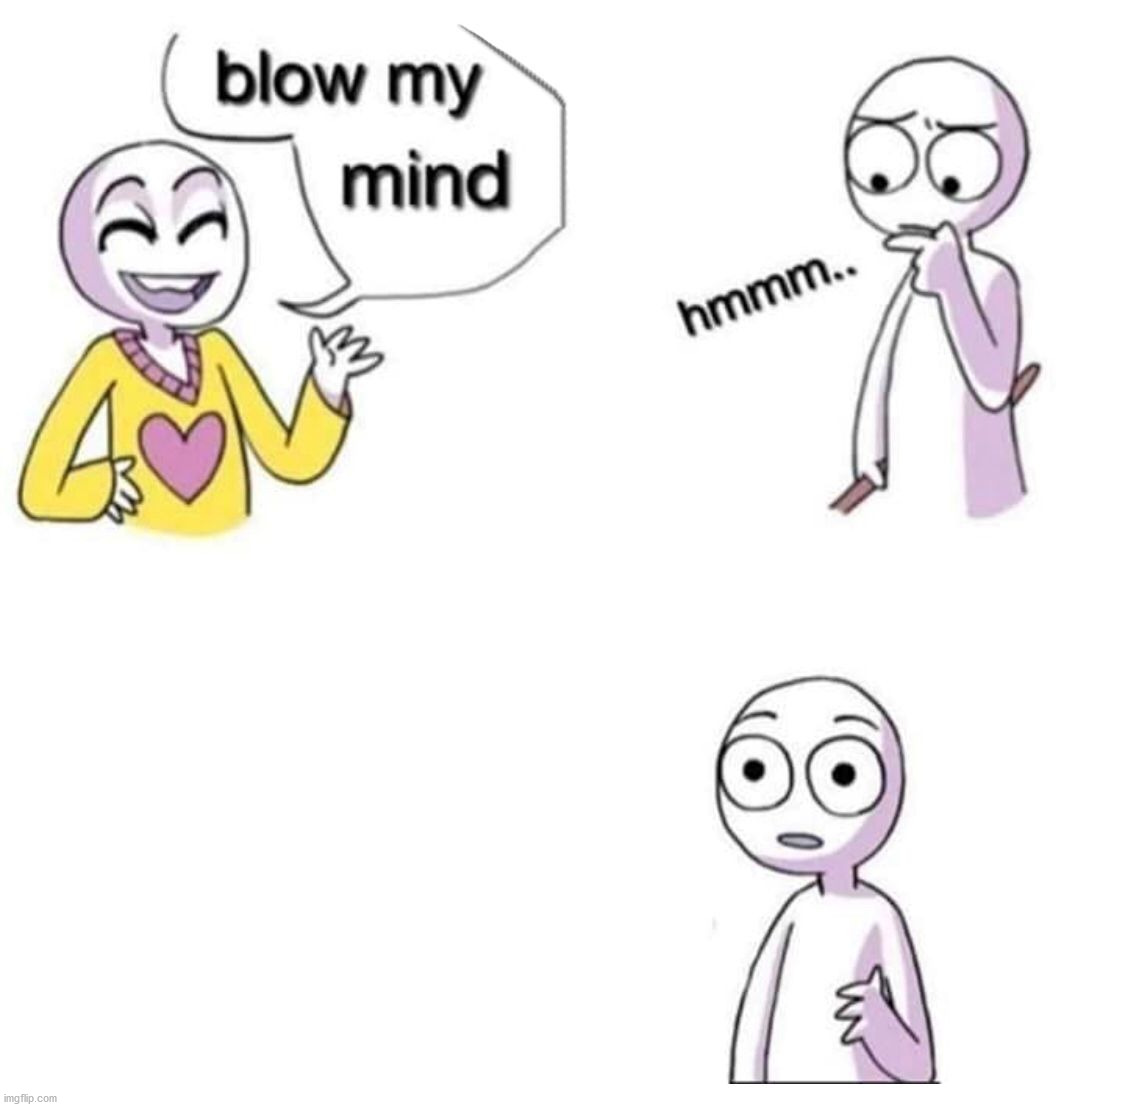 Template is called "blow my mind" Imgflip